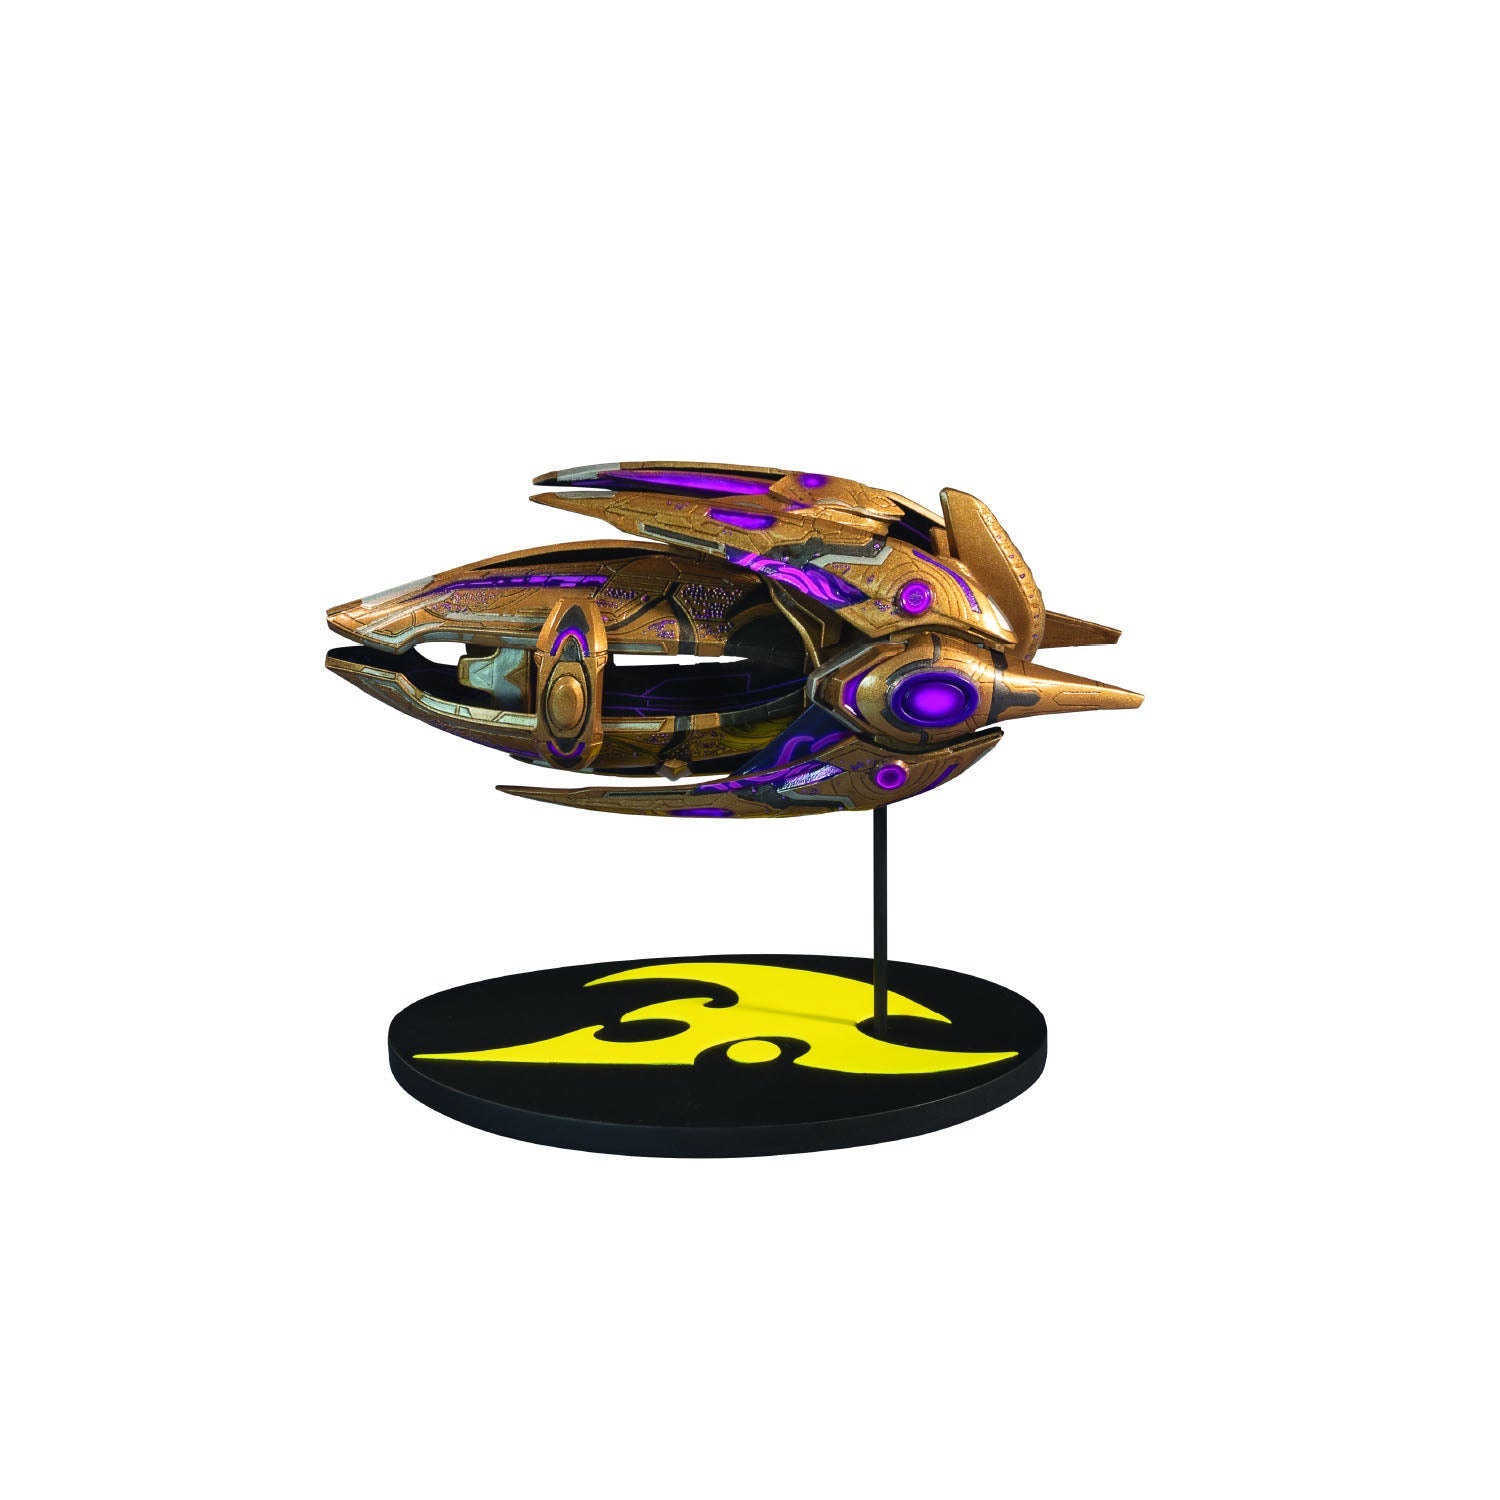 StarCraft Limited Edition Golden Age Protoss Carrier Ship 7" Replica in Gold - Left View